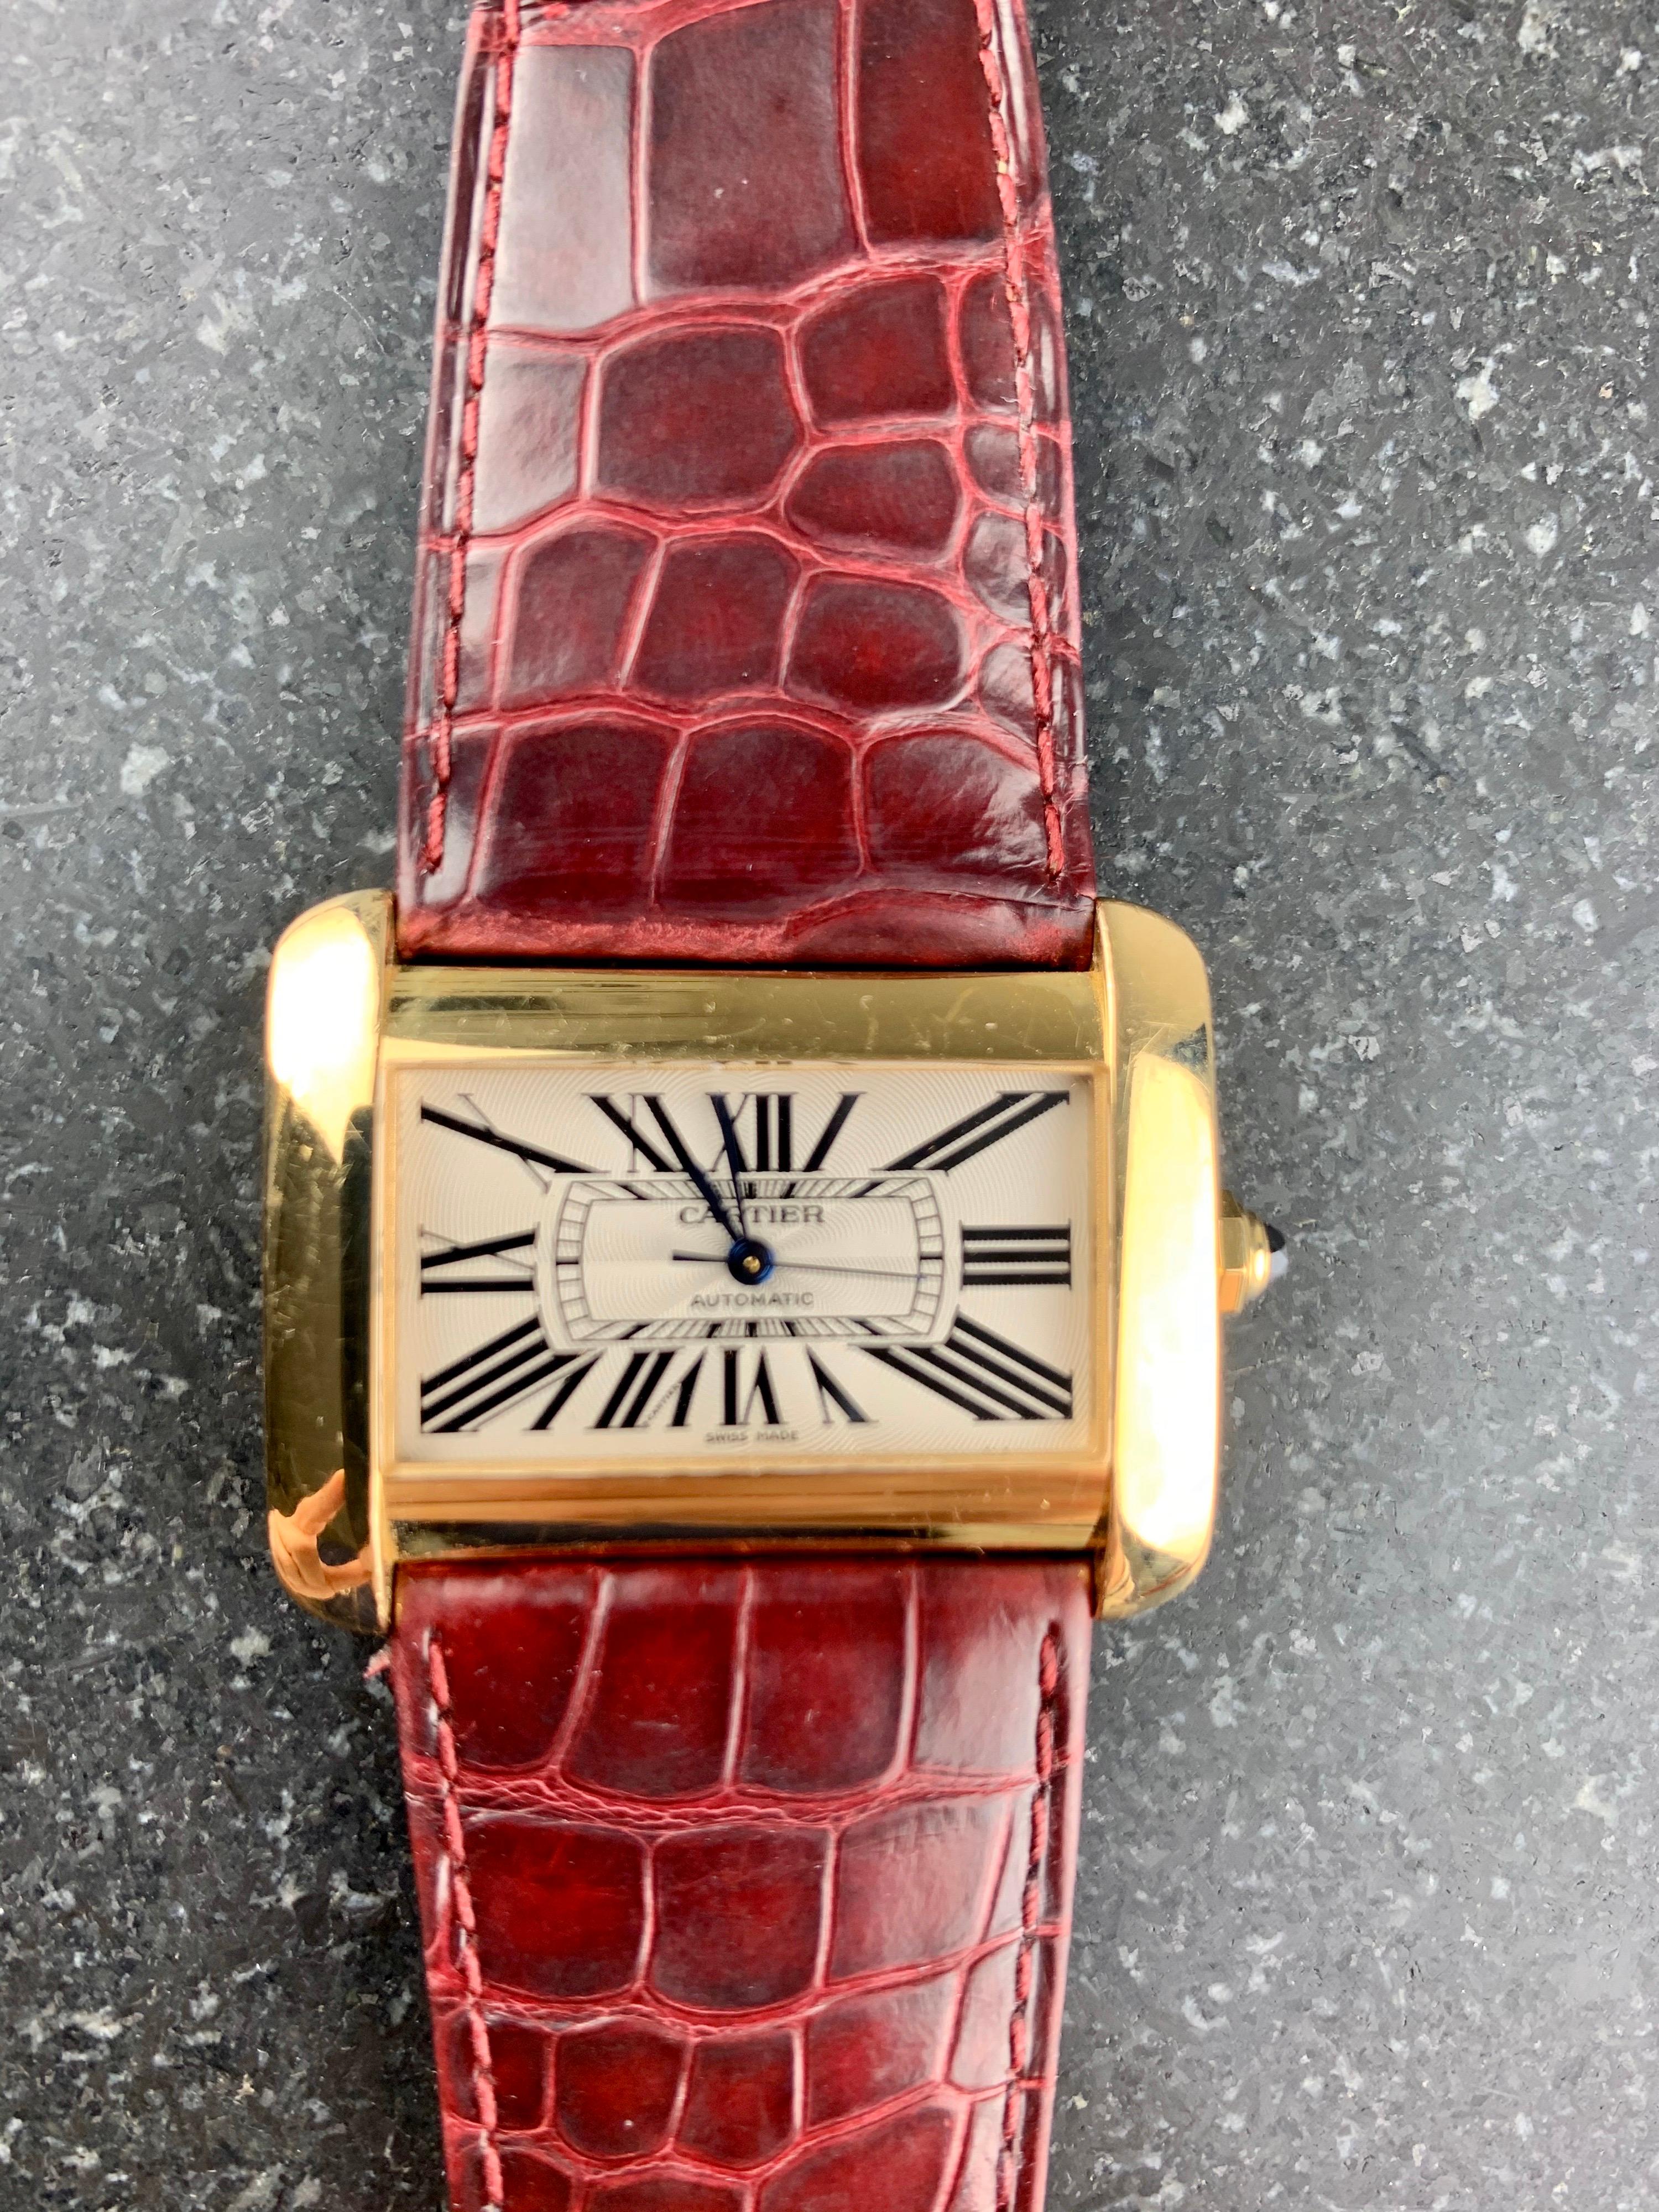 Cartier Tank Divan XL Ref. 2603 18 Carat Yellow Gold 38 mm Automatic Watch. 
Champagne Dial With Black Roman Numerals And Blue Steel Hands. 18 Carat Gold Case And Buckle With Sapphire Crystal. Case Size 30 mm x 38 mm. Water Resistant. Original